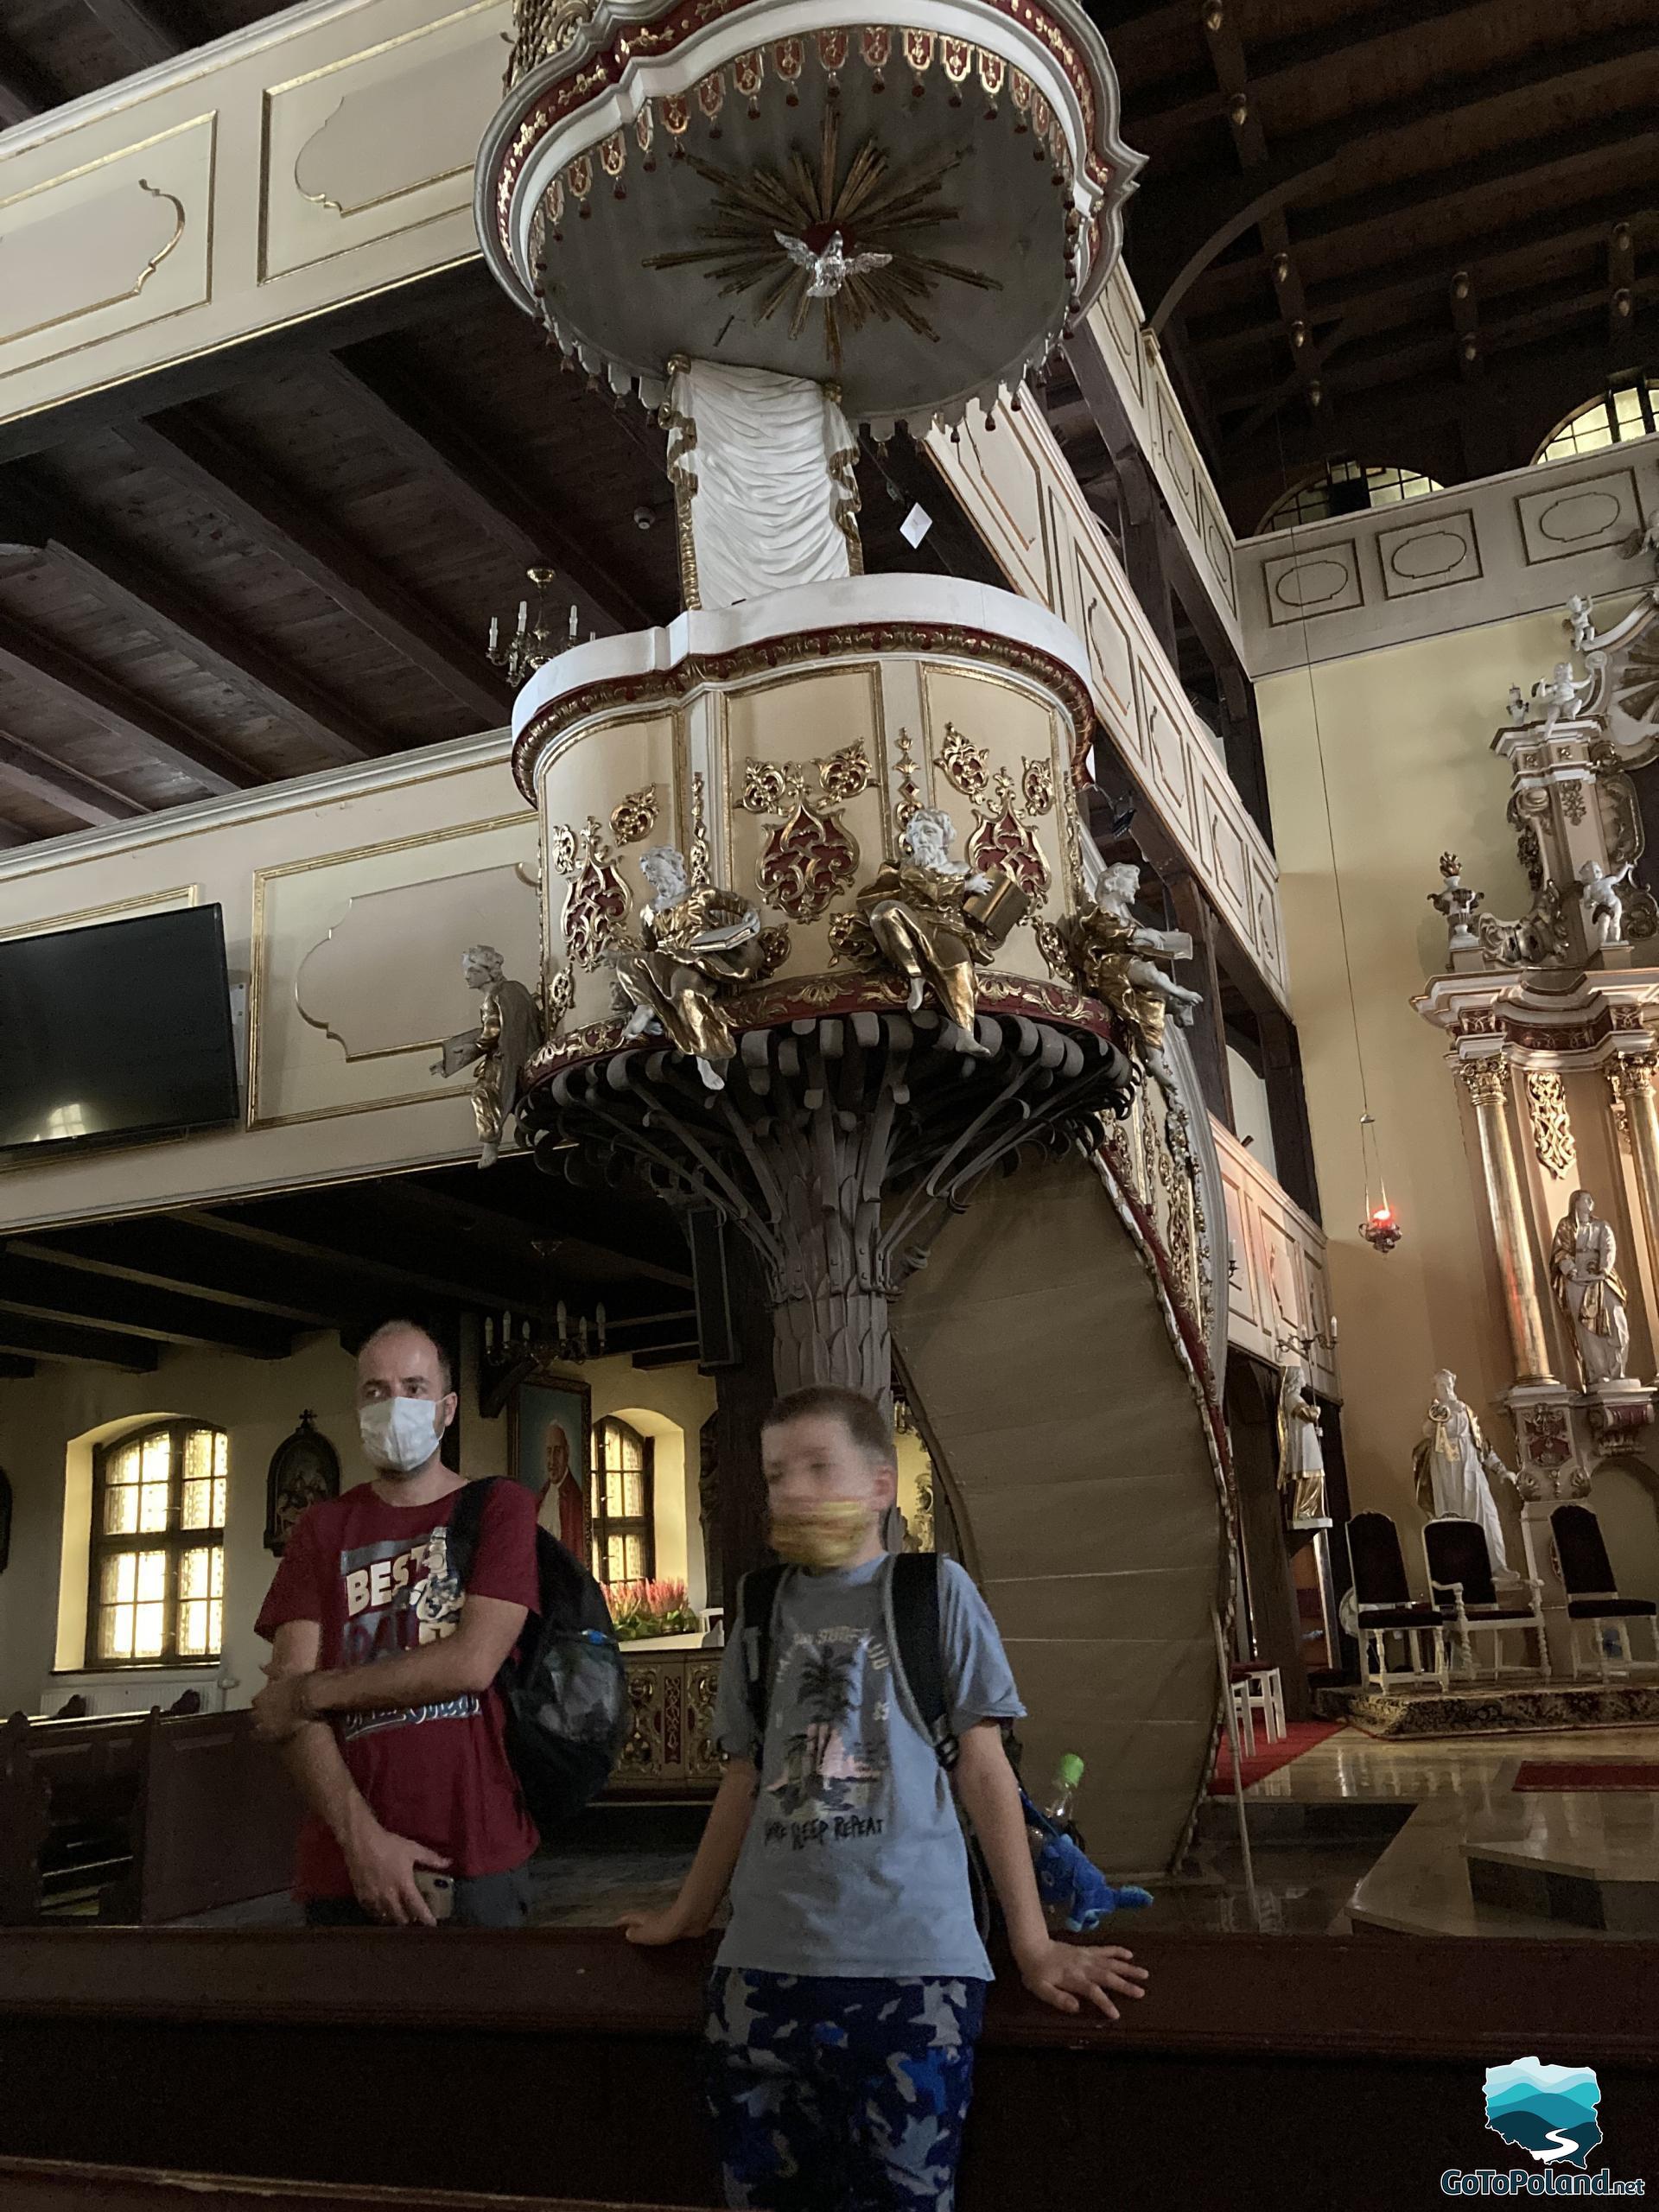 A man and a boy standing inside the church next to a wooden pulpit